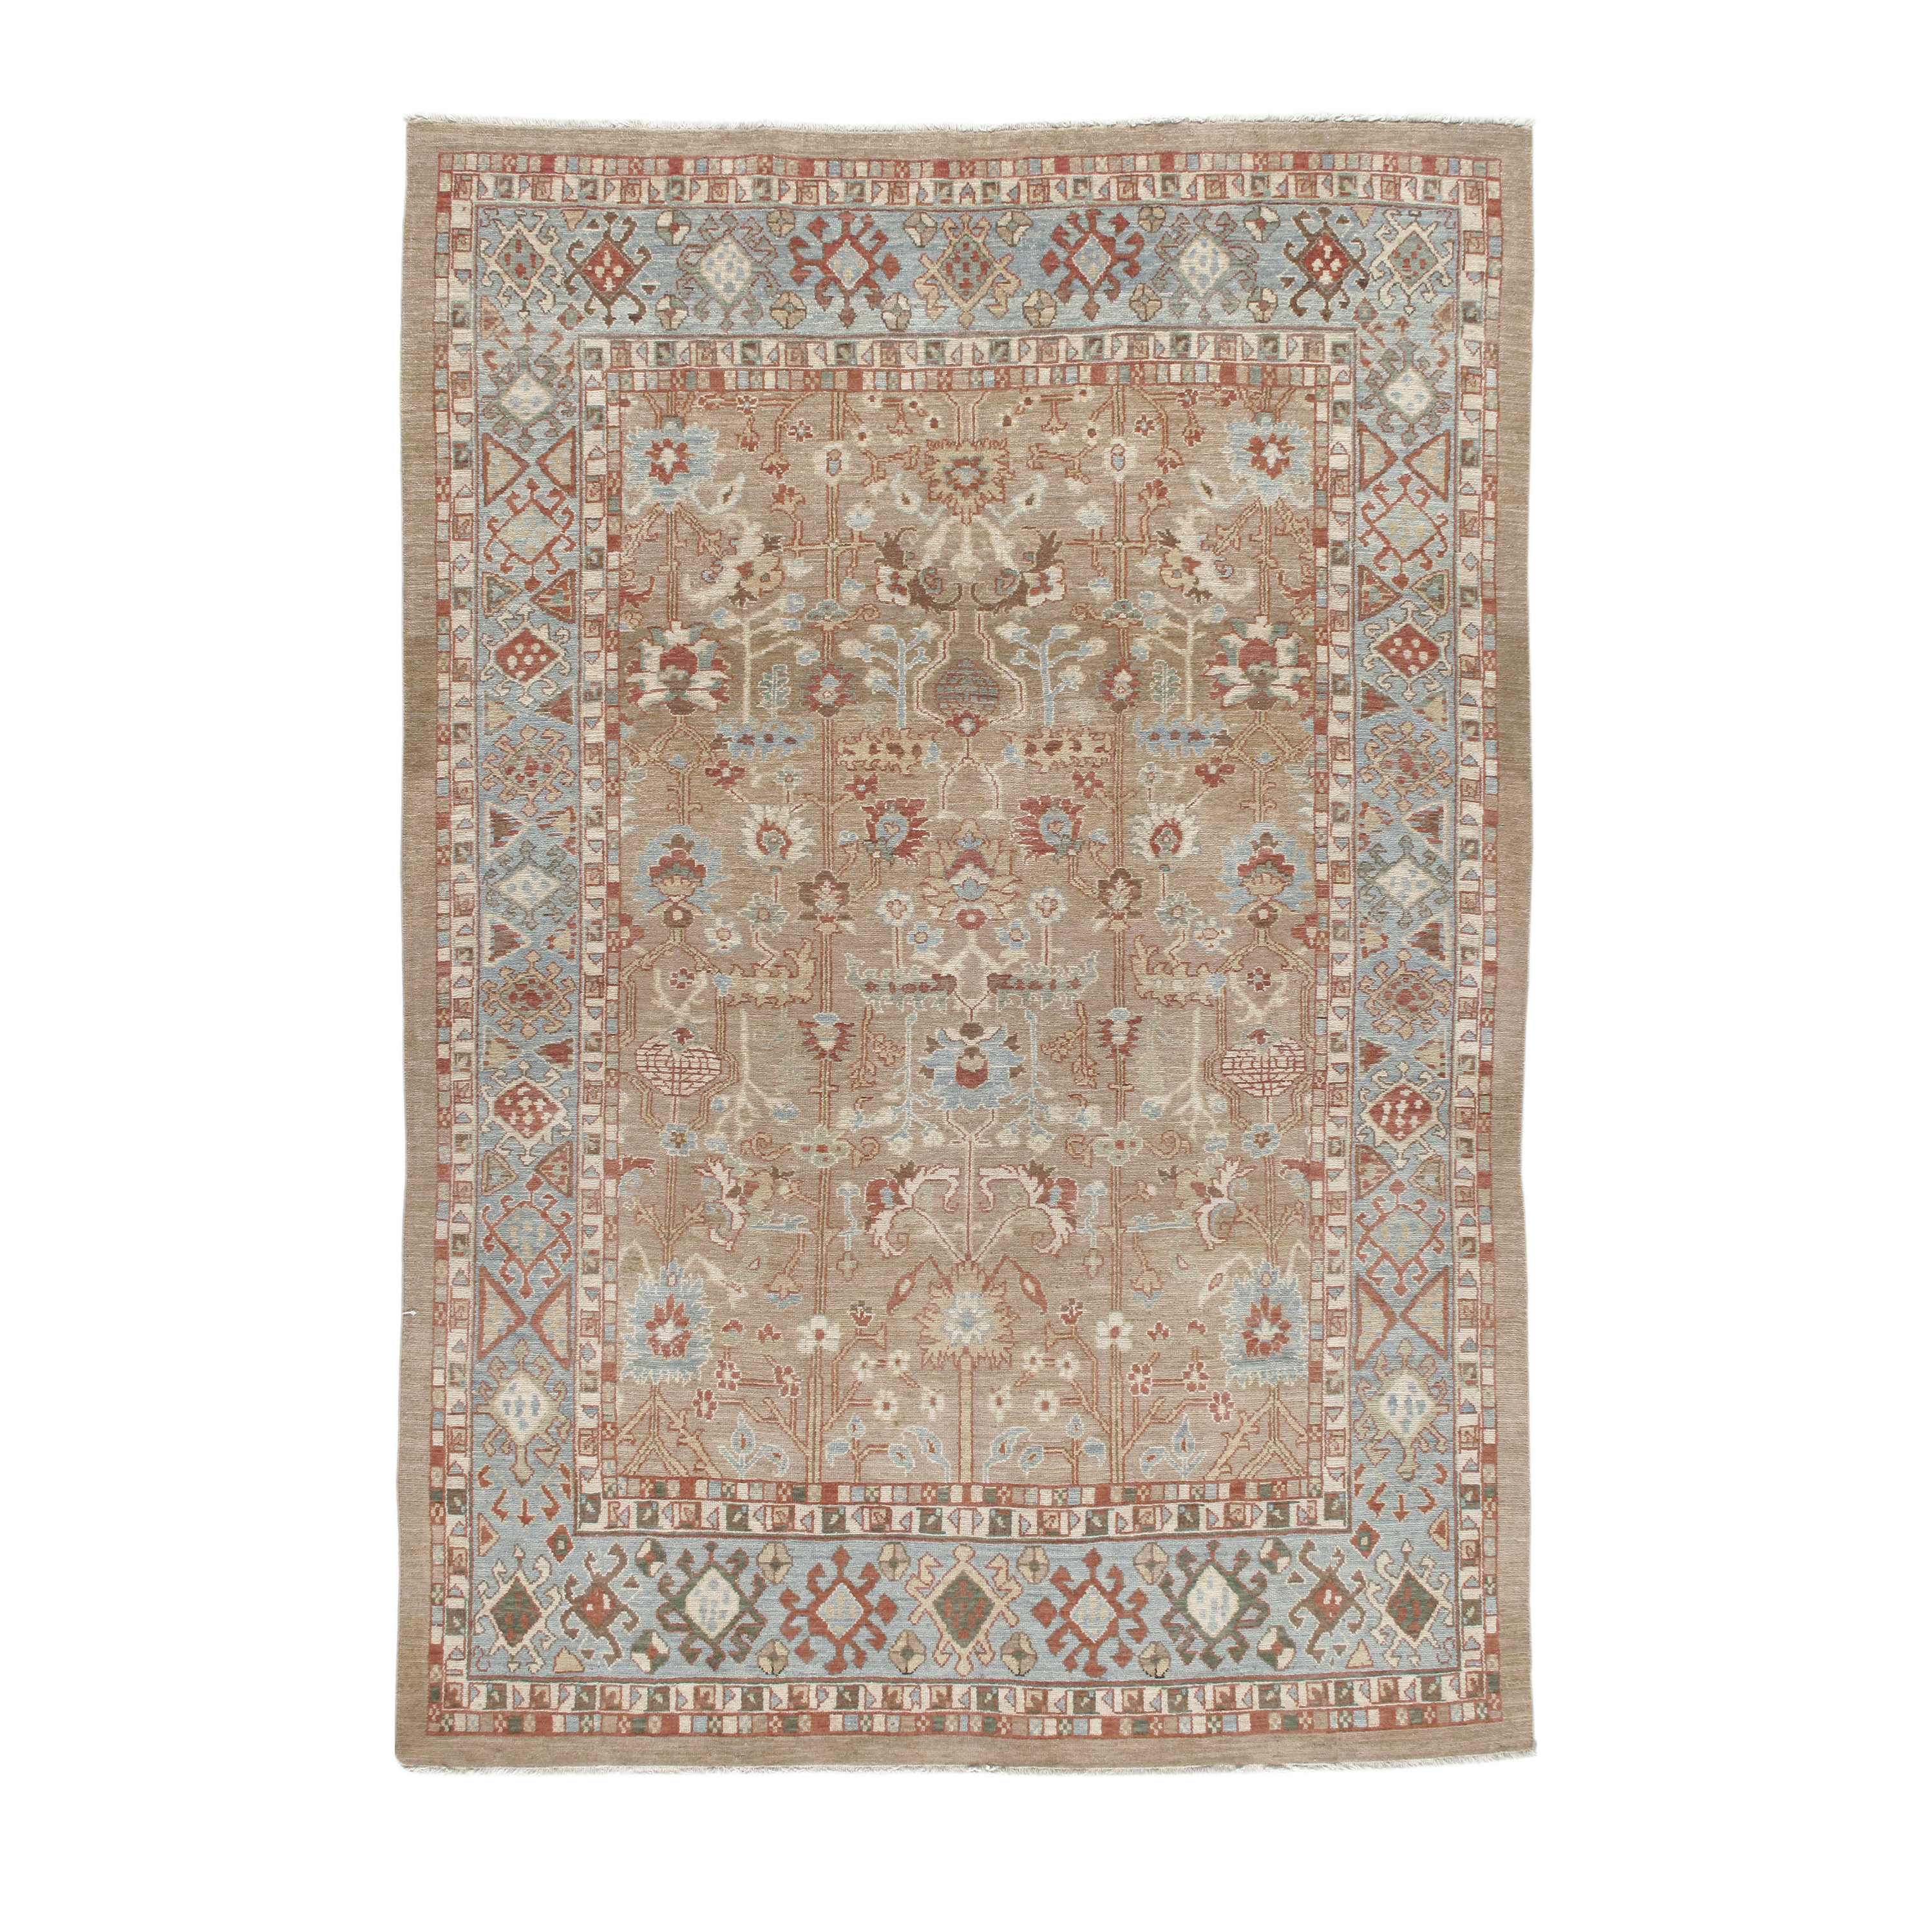 Persian Bakshaish Rug is hand-knotted and made of 100% wool.